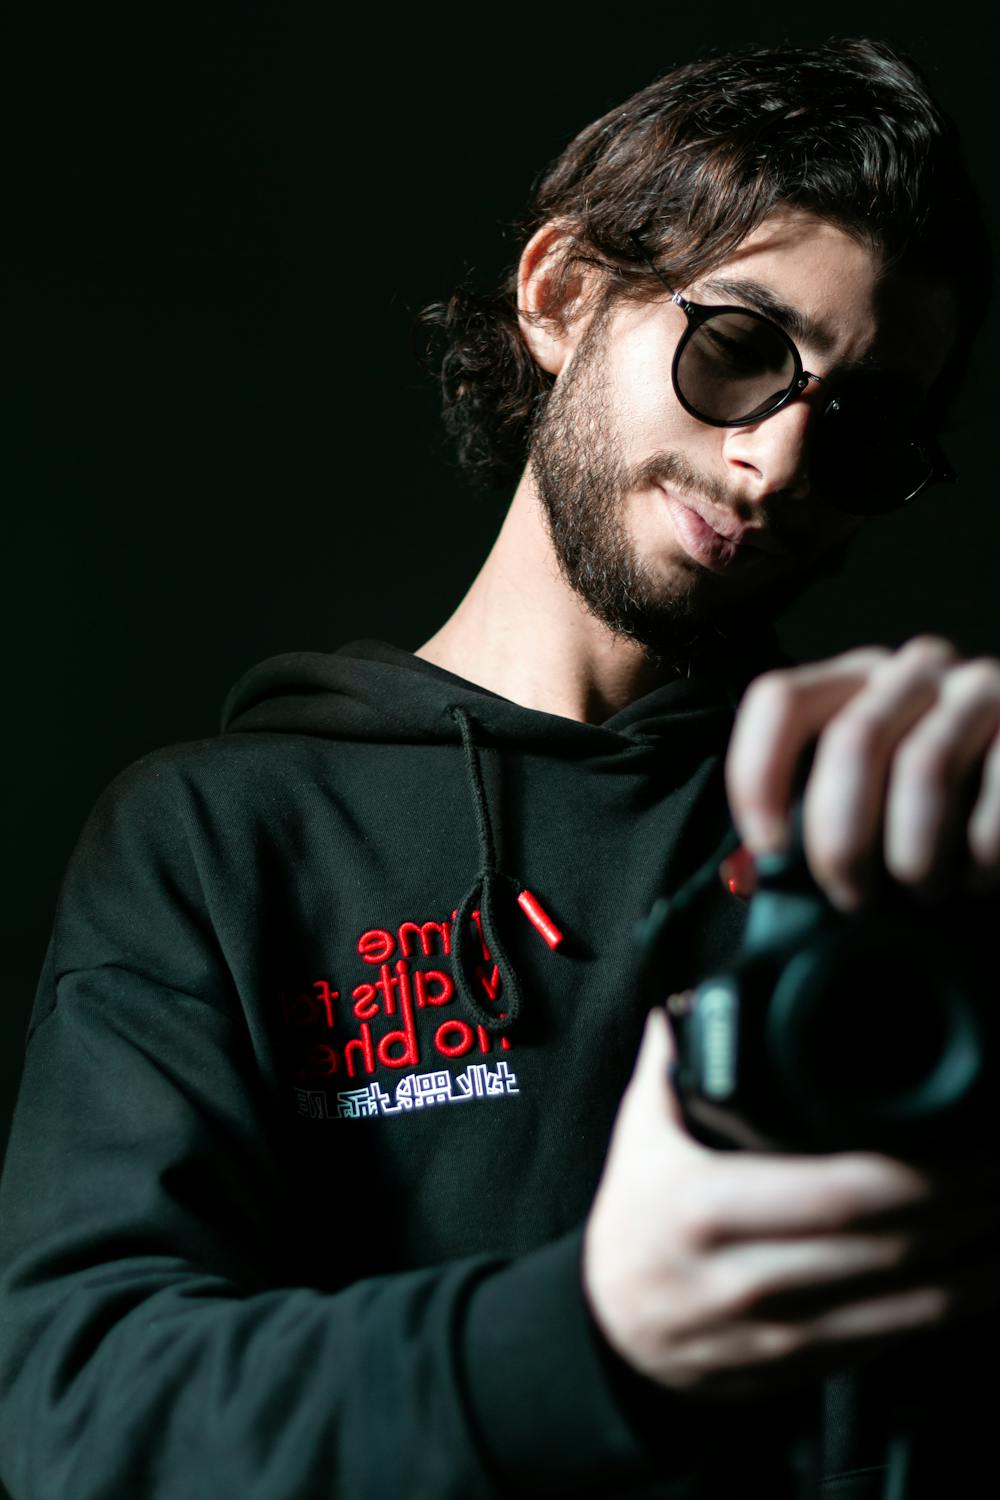 Man in Black and Red Hoodie Holding Black Dslr Camera · Free Stock Photo